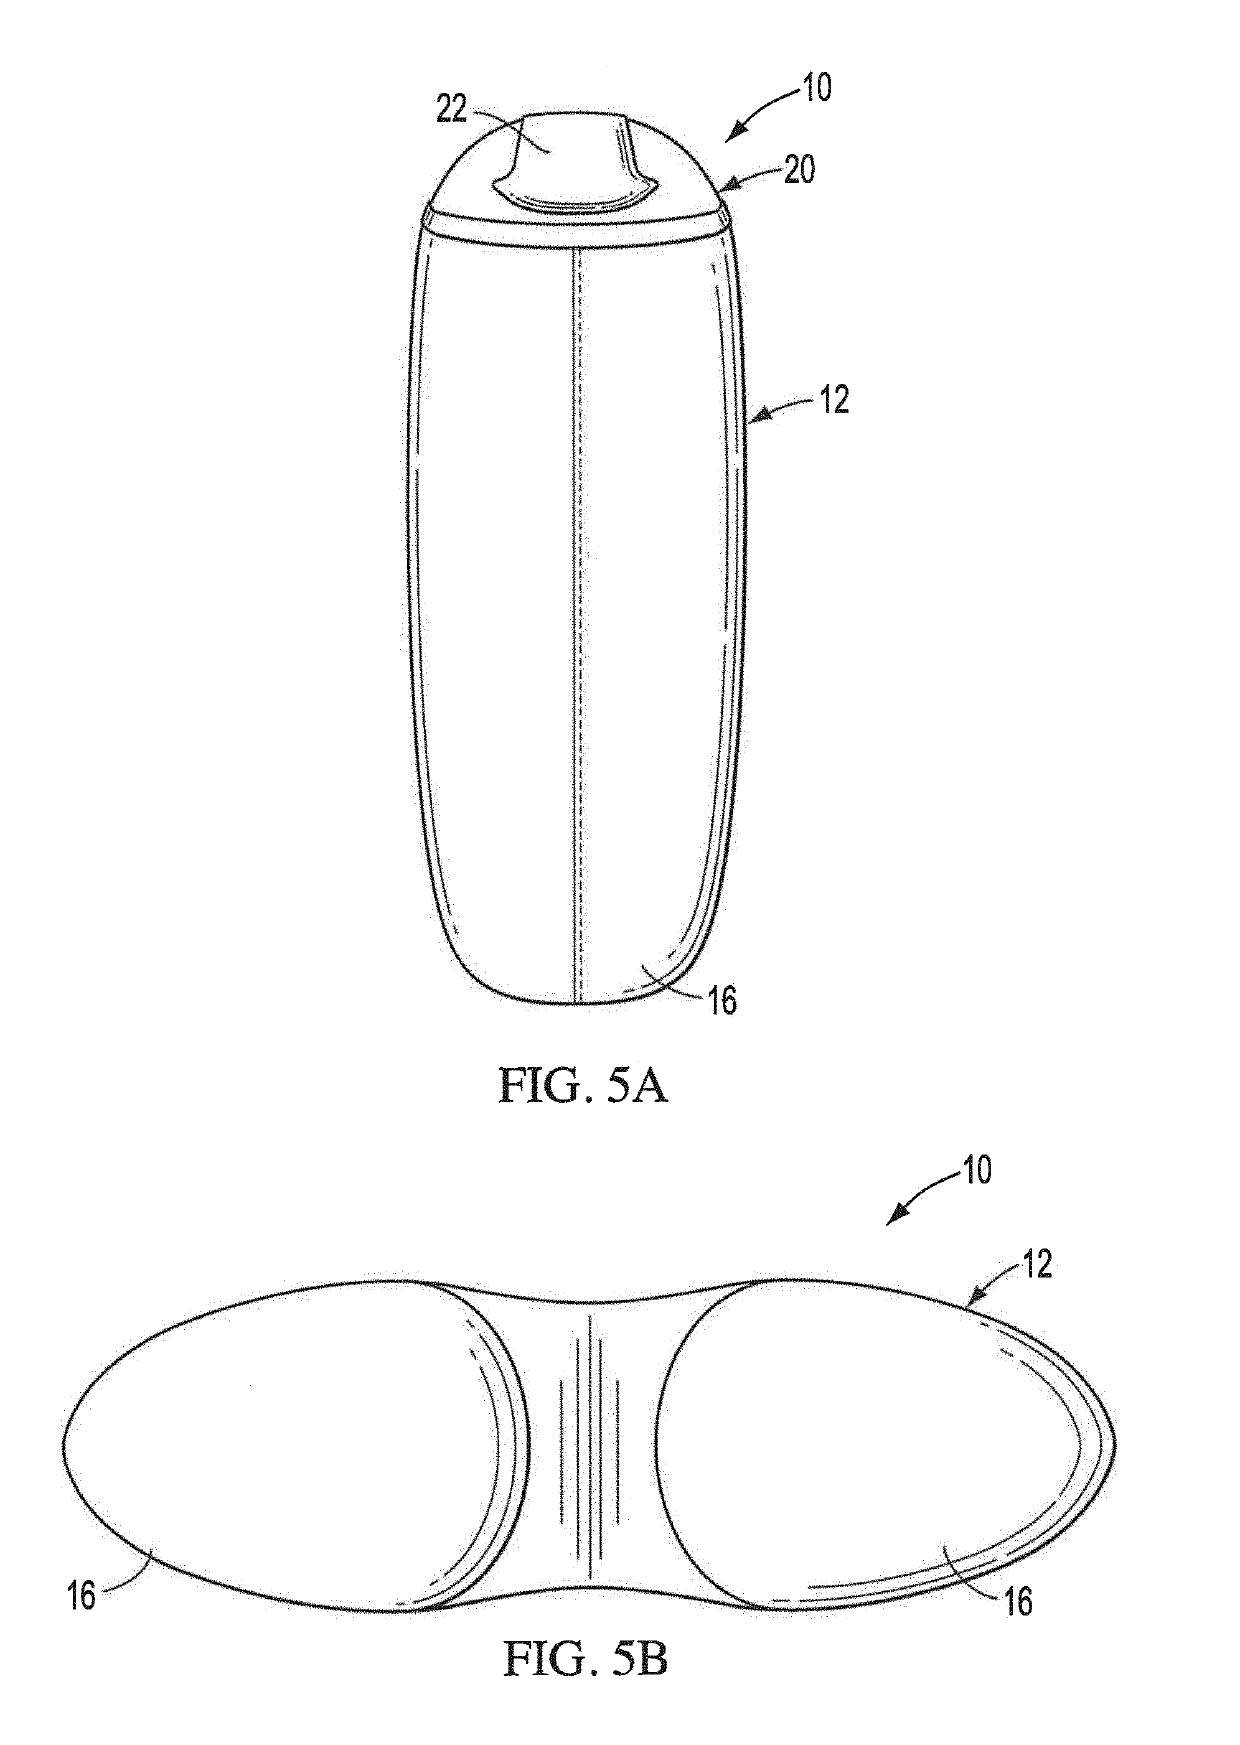 Travel pillow with reactive surfaces for enhanced comfort